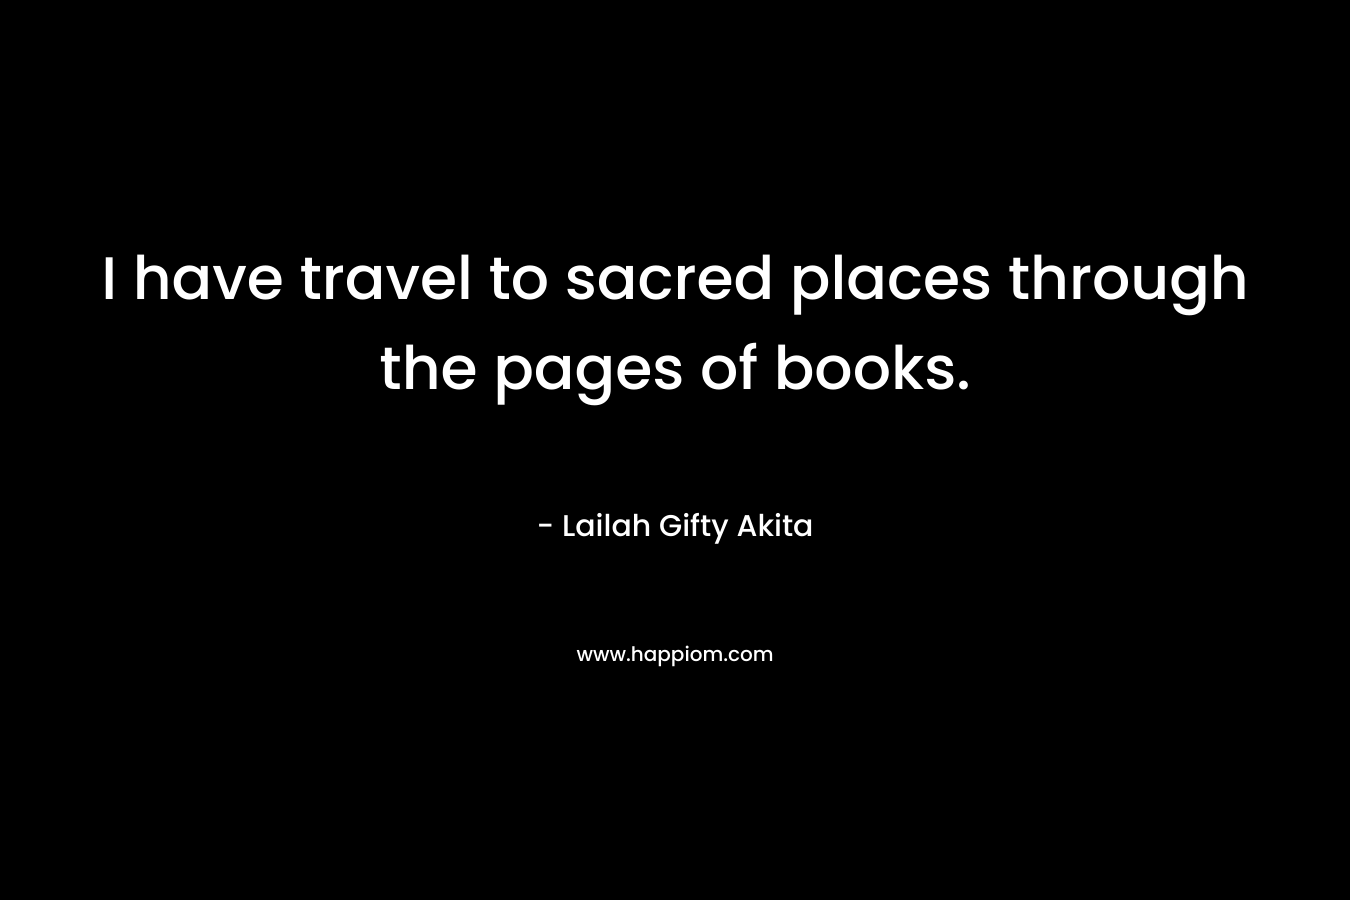 I have travel to sacred places through the pages of books.